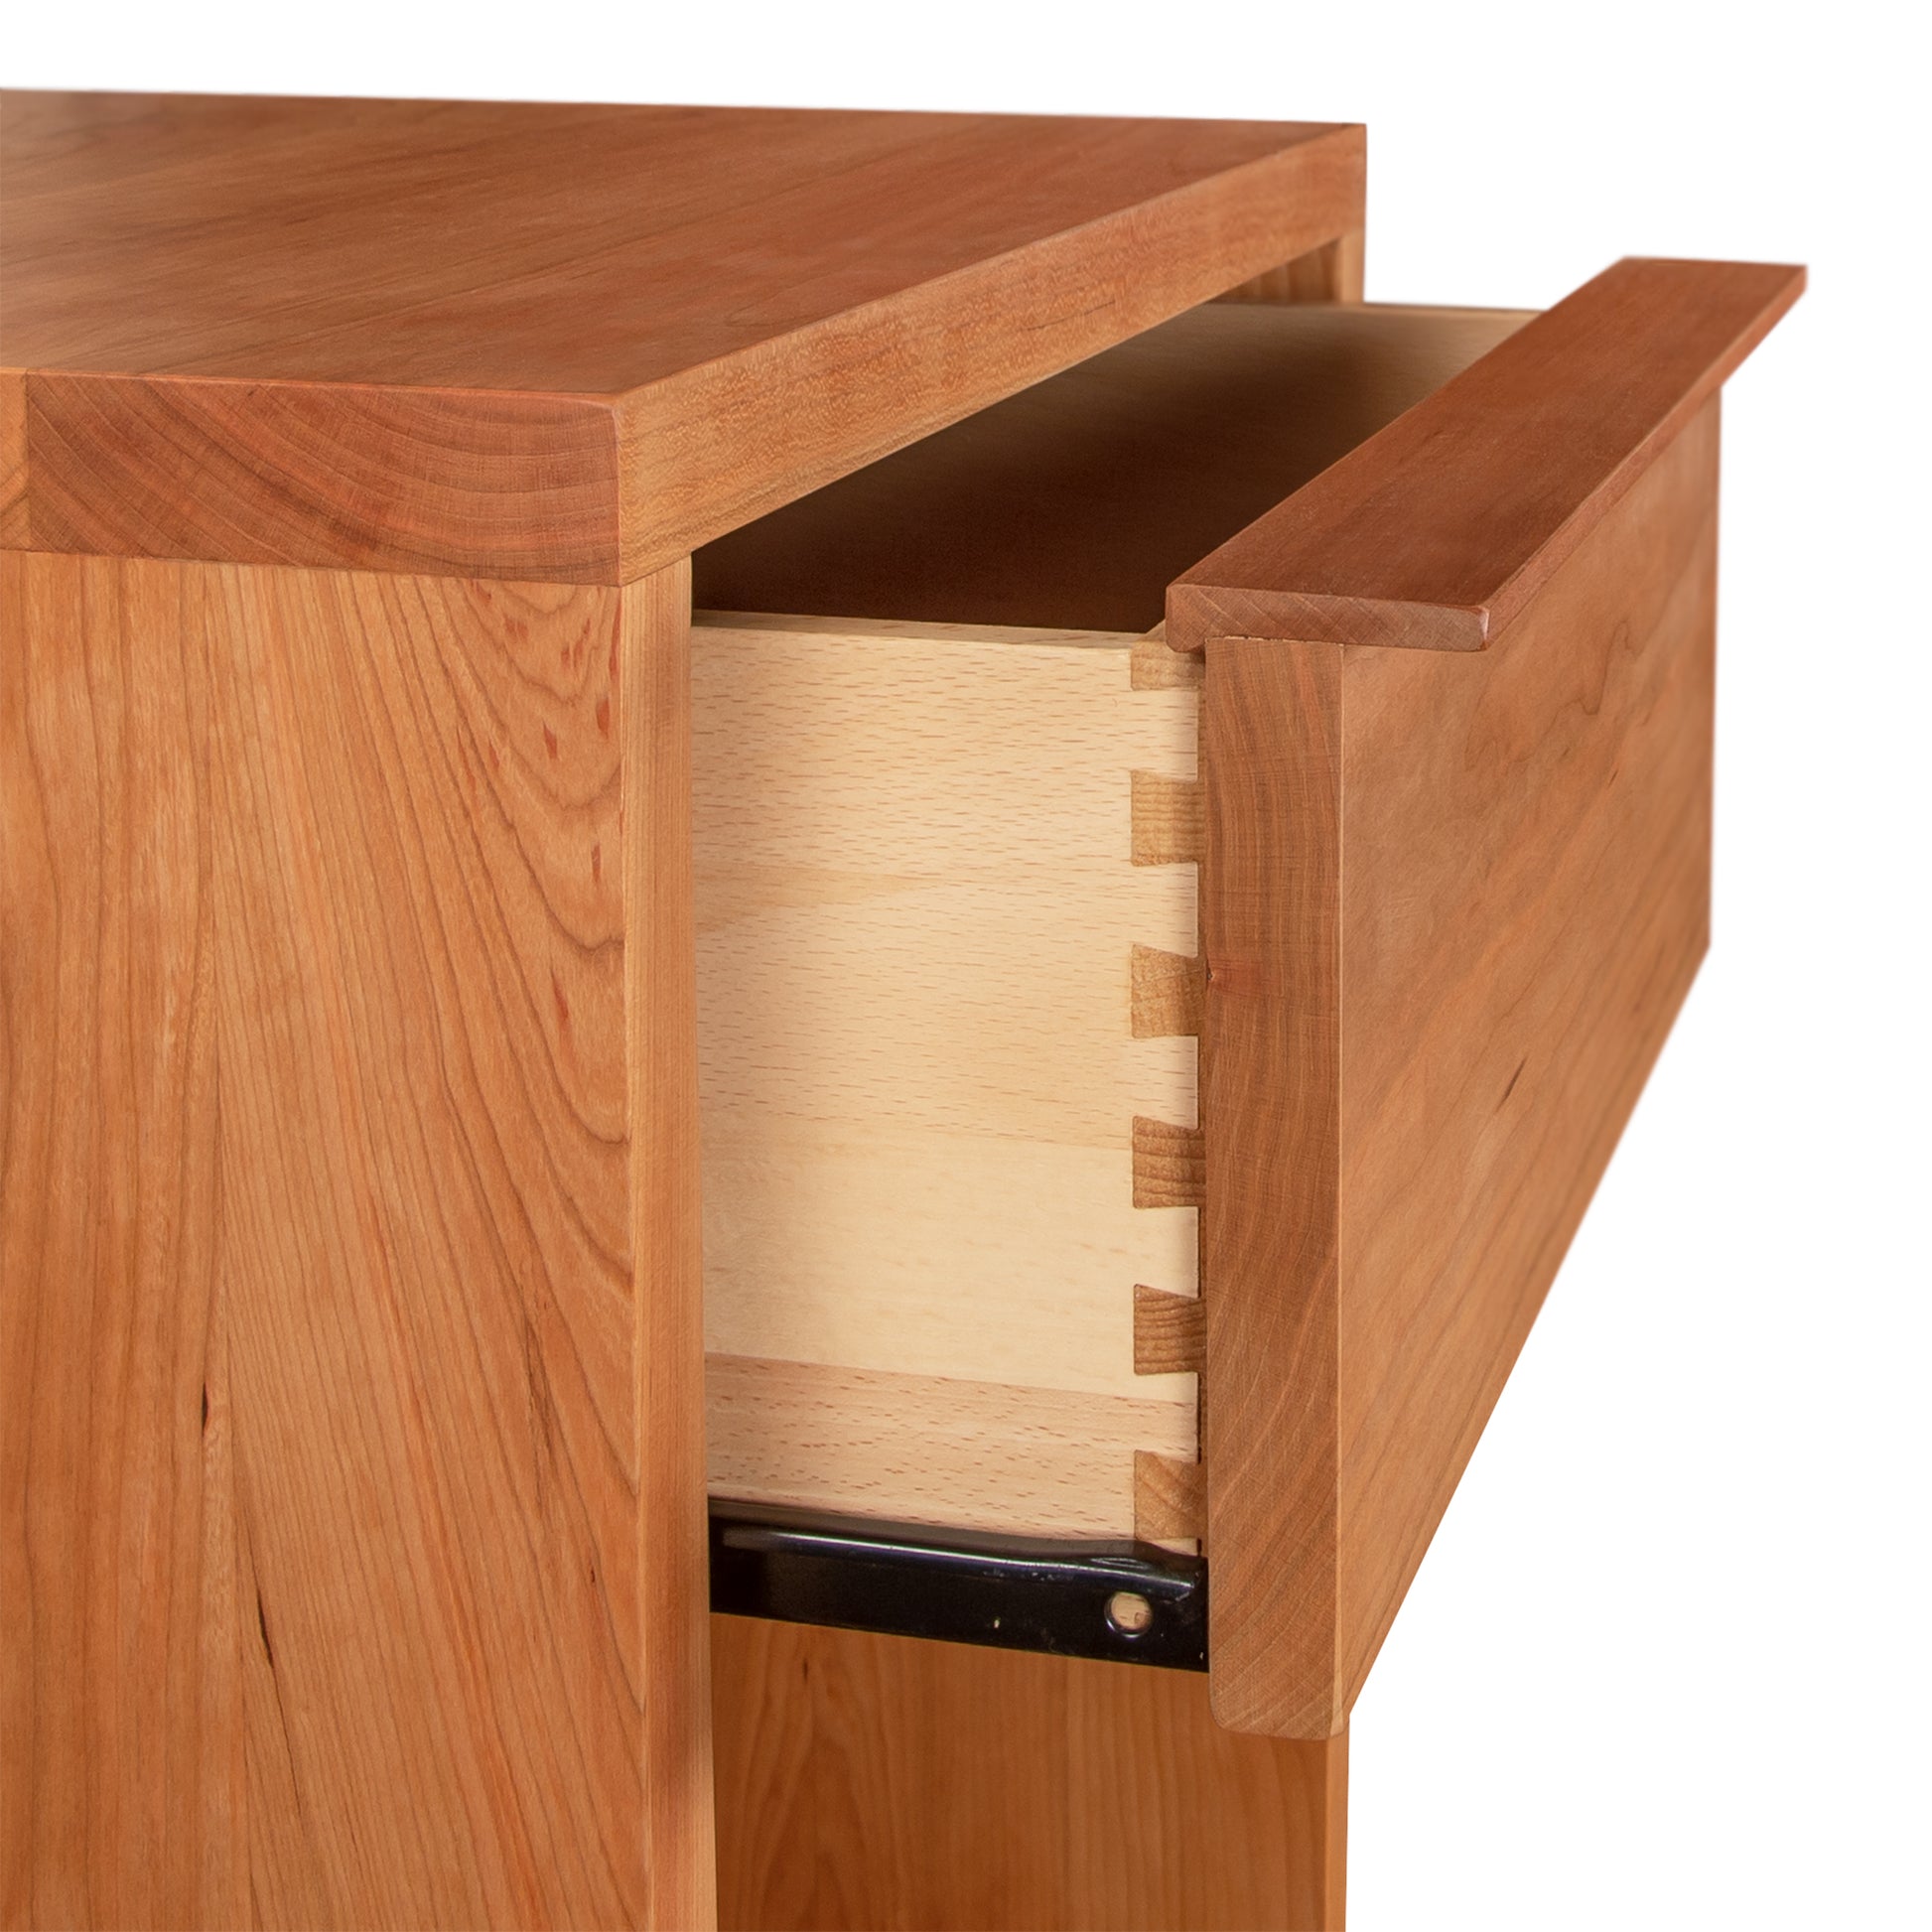 A close up of the Vermont Furniture Designs Kipling 1-Drawer Enclosed Shelf Nightstand.